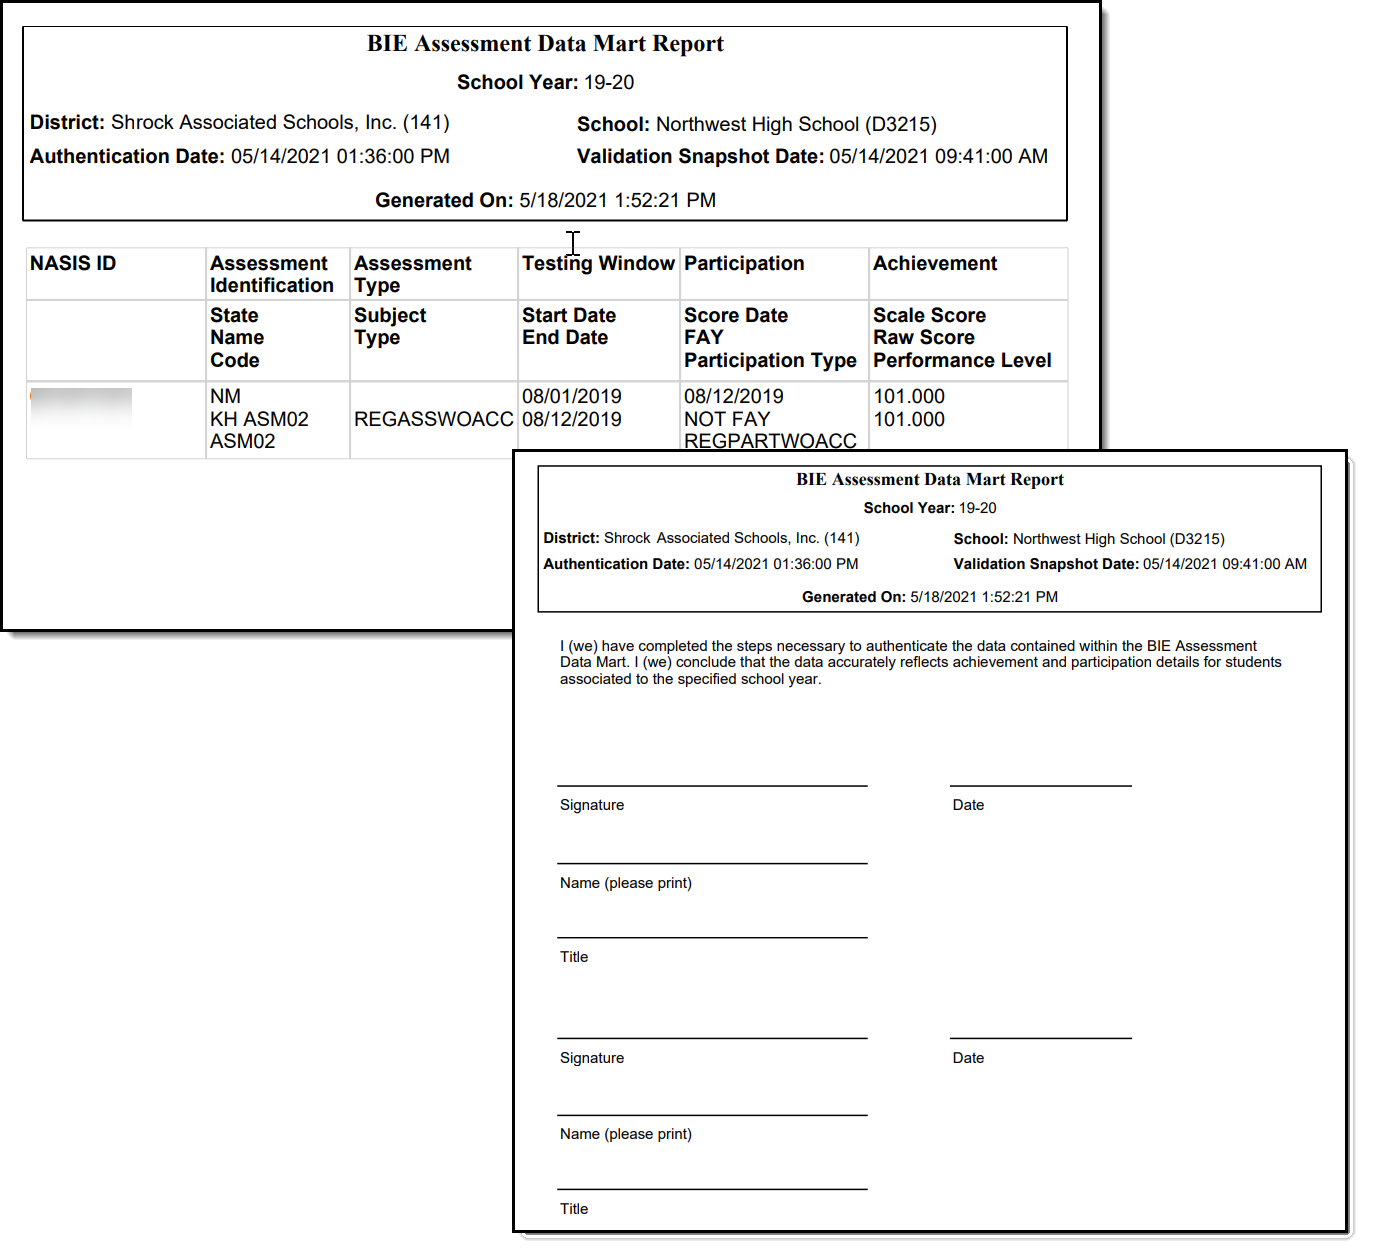 Screenshot of an example report with Sign-off Page